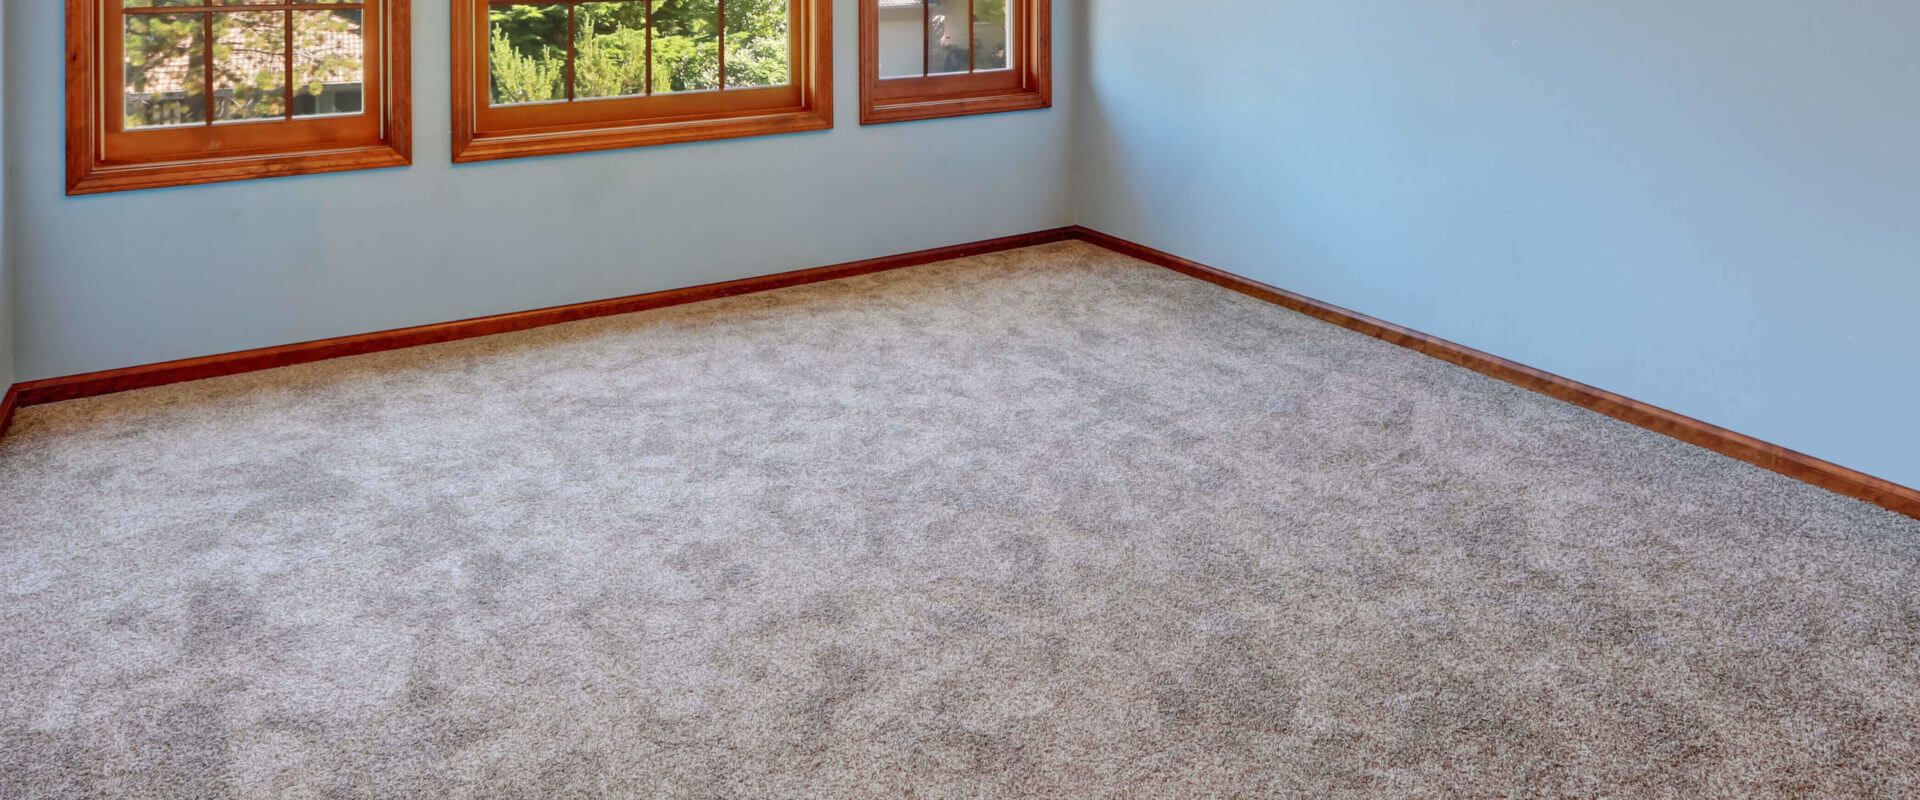 Carpeted Room